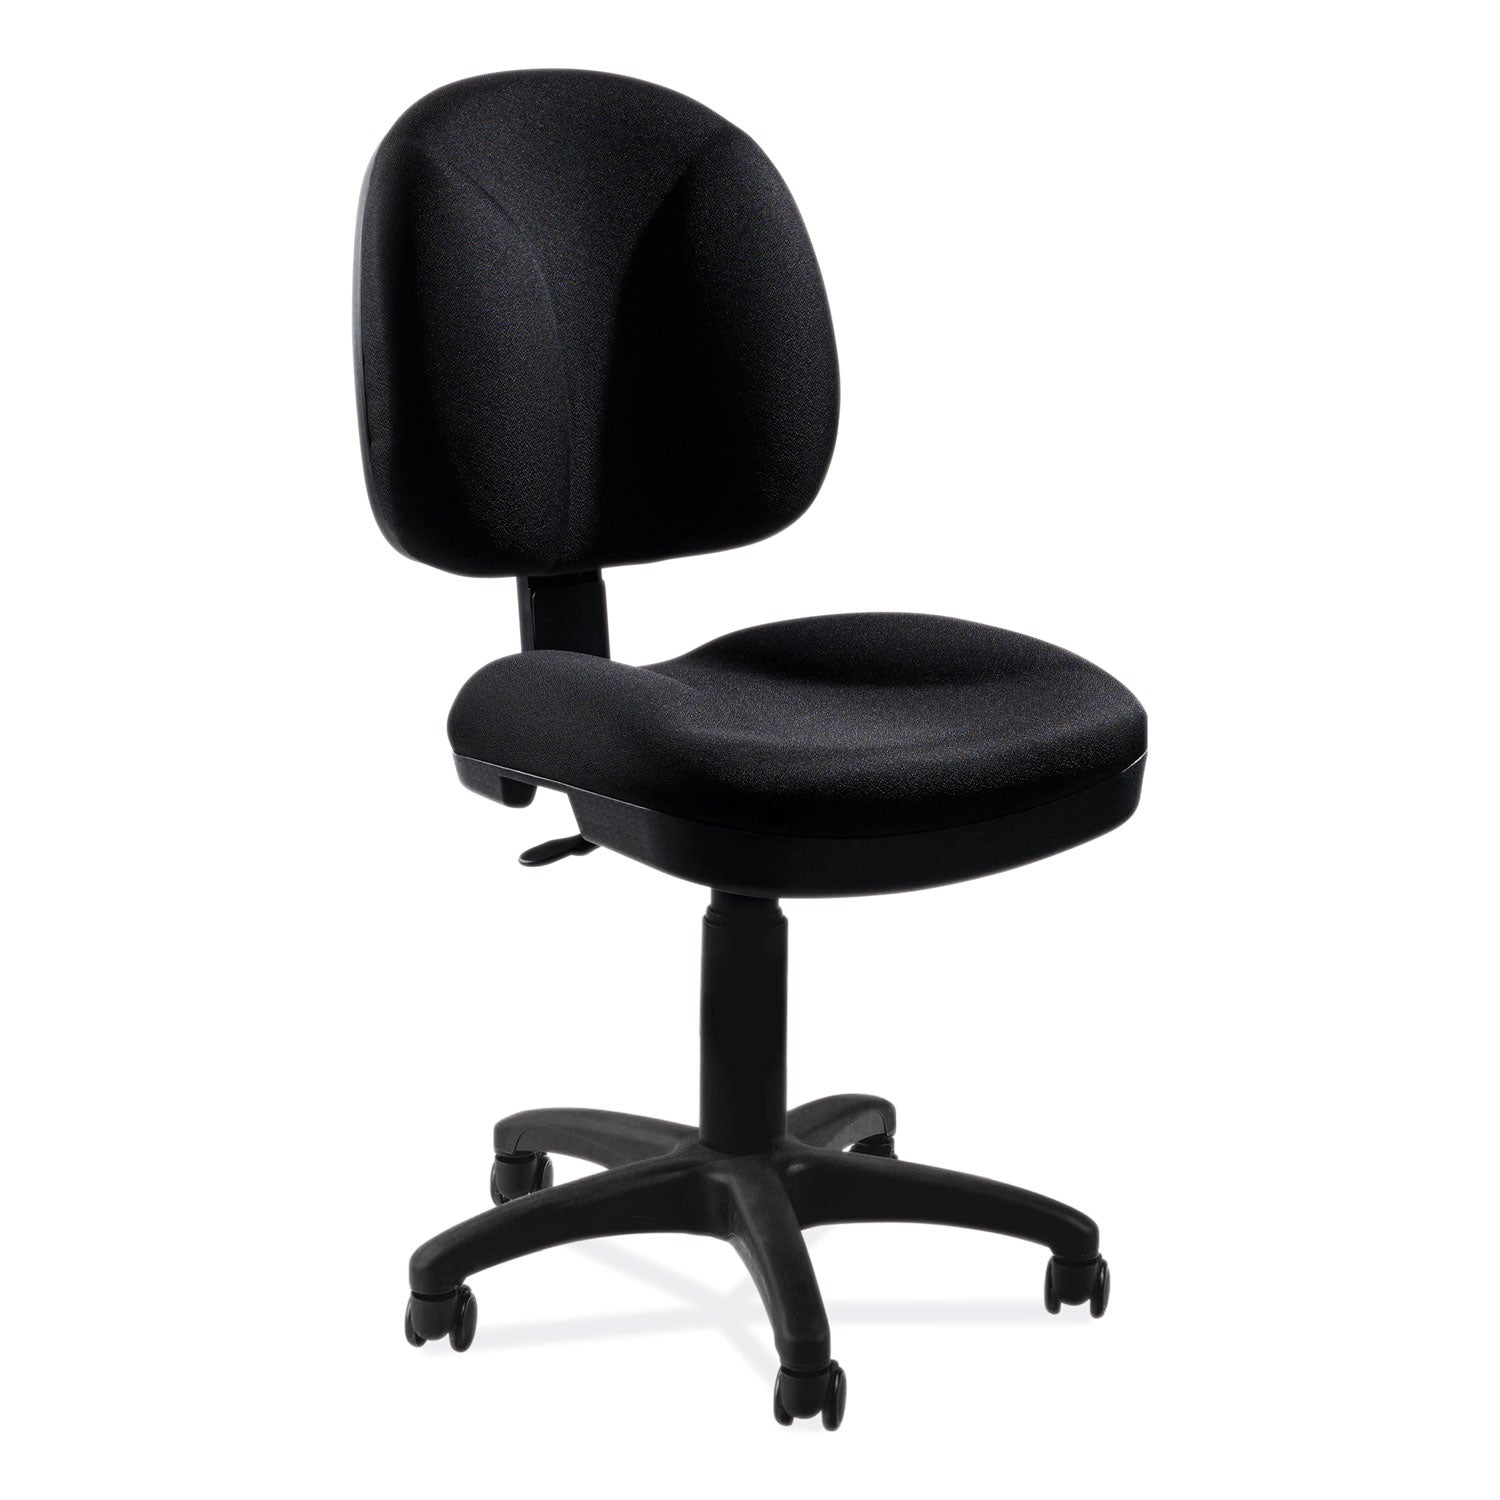 comfort-task-chair-supports-up-to-300-lb-19-to-23-seat-height-black-seat-back-black-base-ships-in-1-3-business-days_npsctc - 1